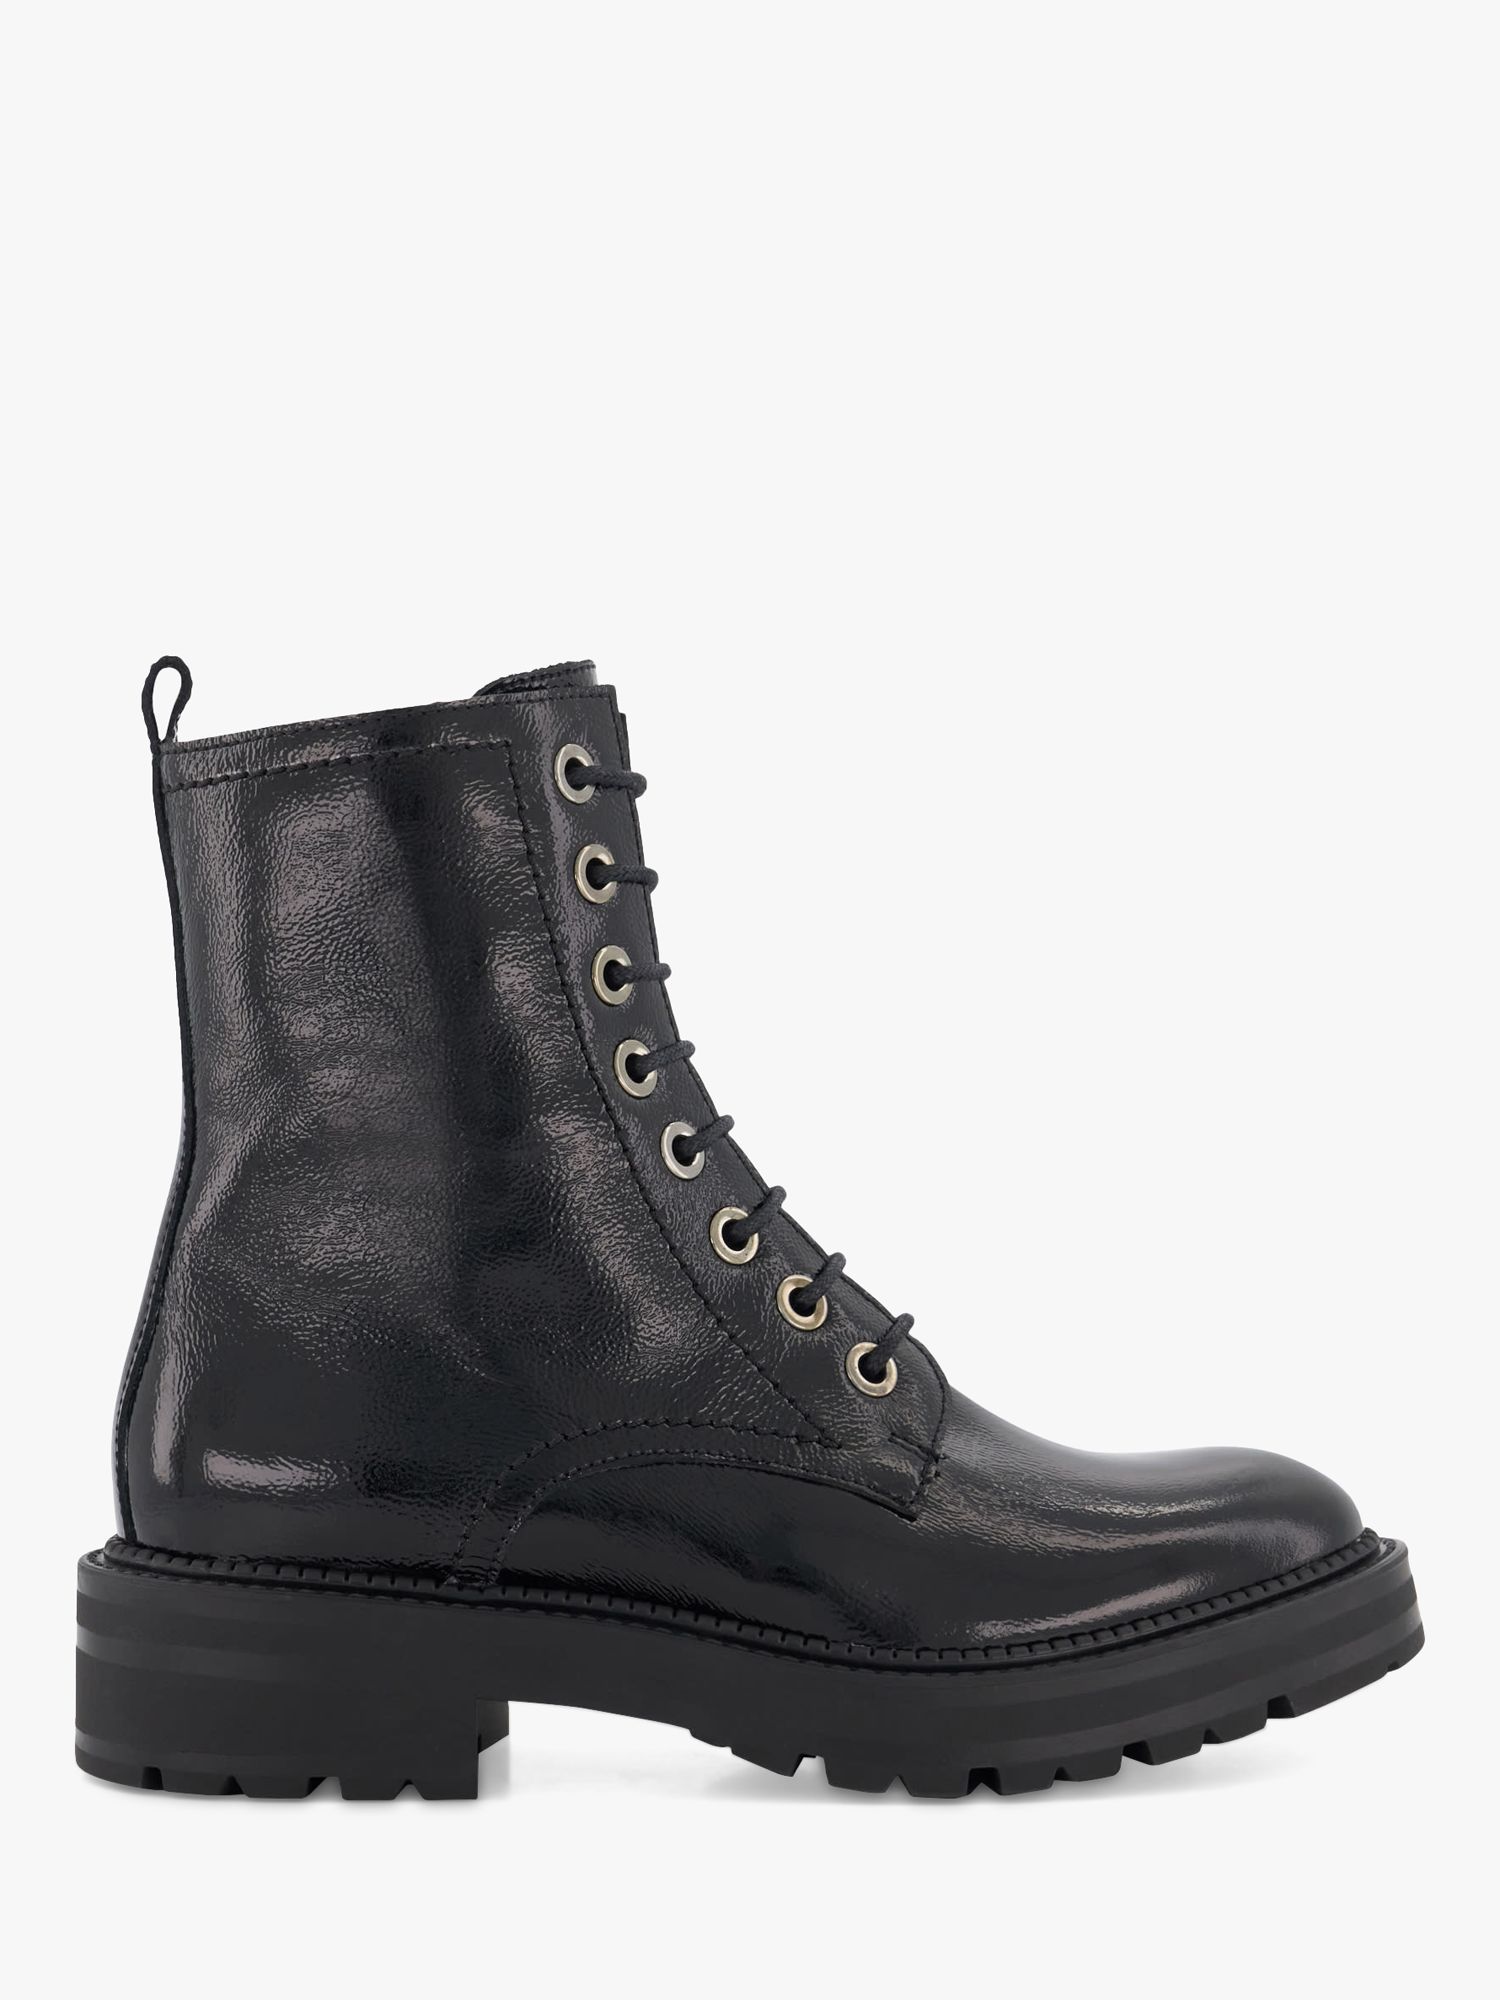 Dune Press Leather Cleated Hiker Boots, Black at John Lewis & Partners